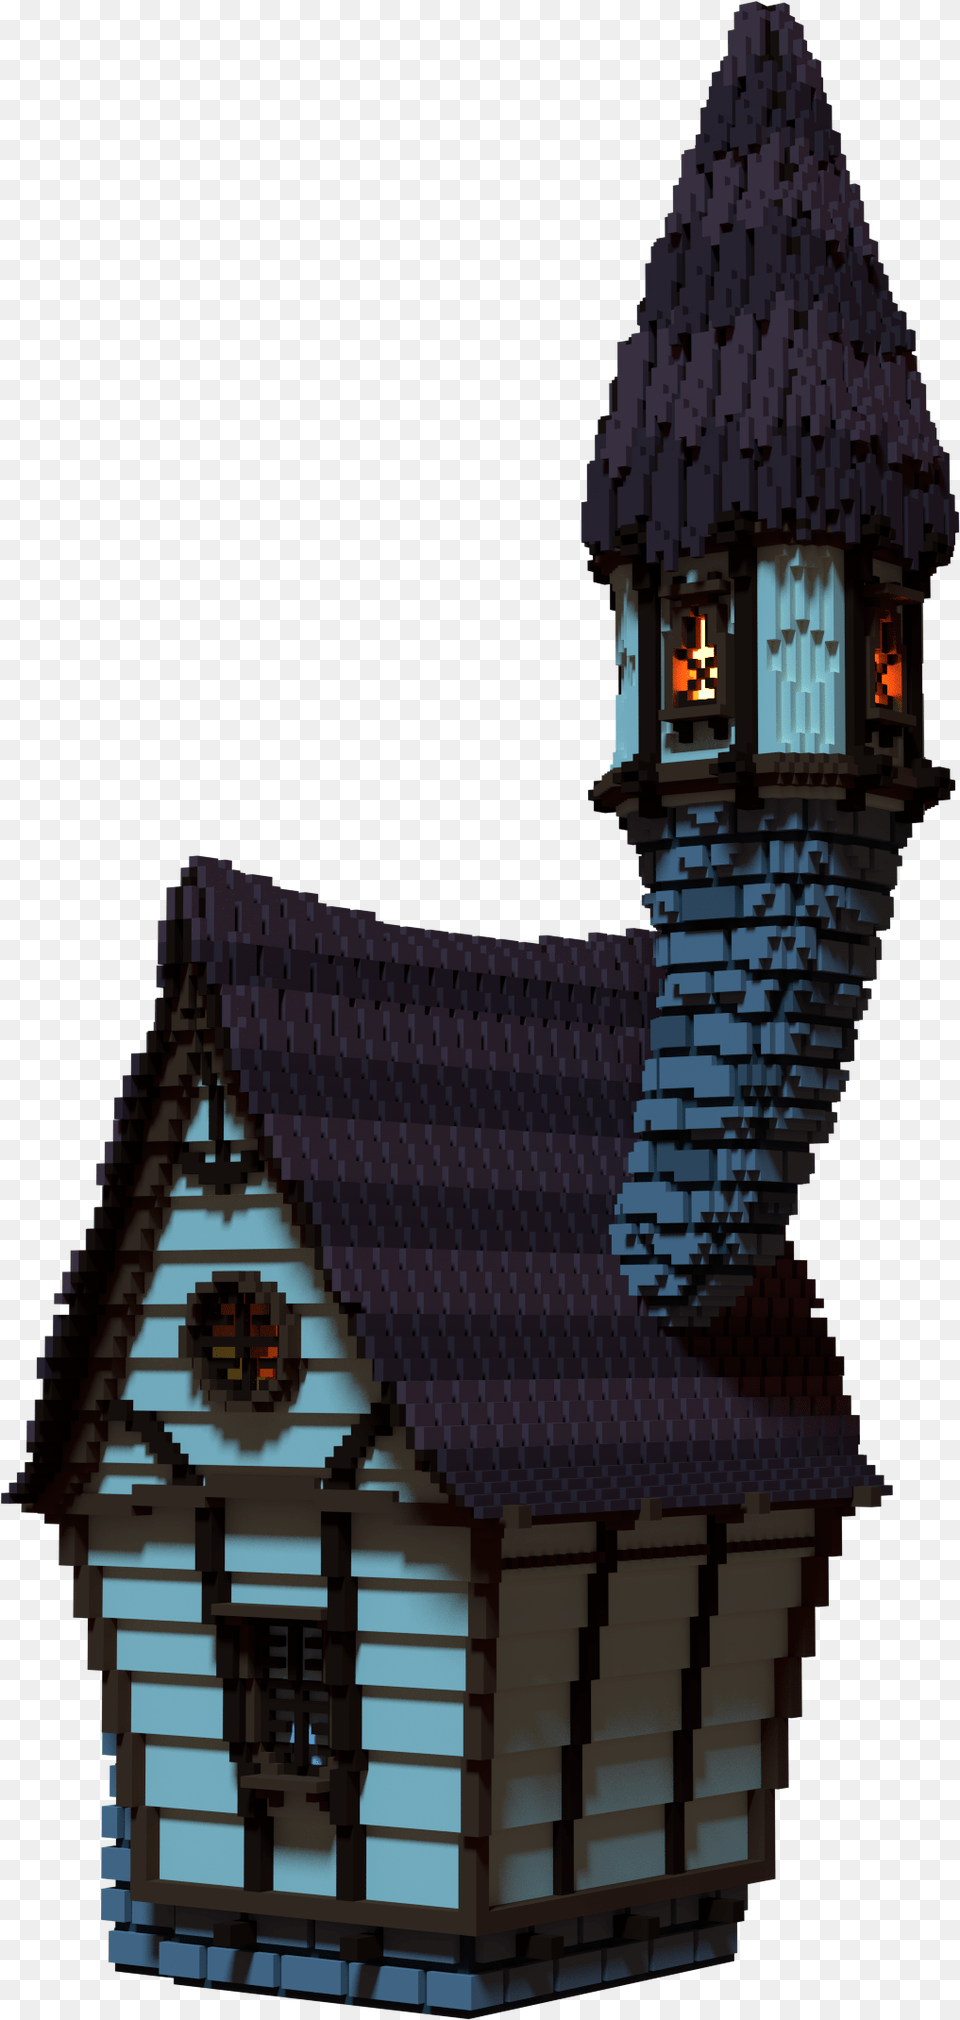 Currently Have A Base House And Tower Need To Do Some House, Architecture, Housing, Cottage, Clock Tower Png Image